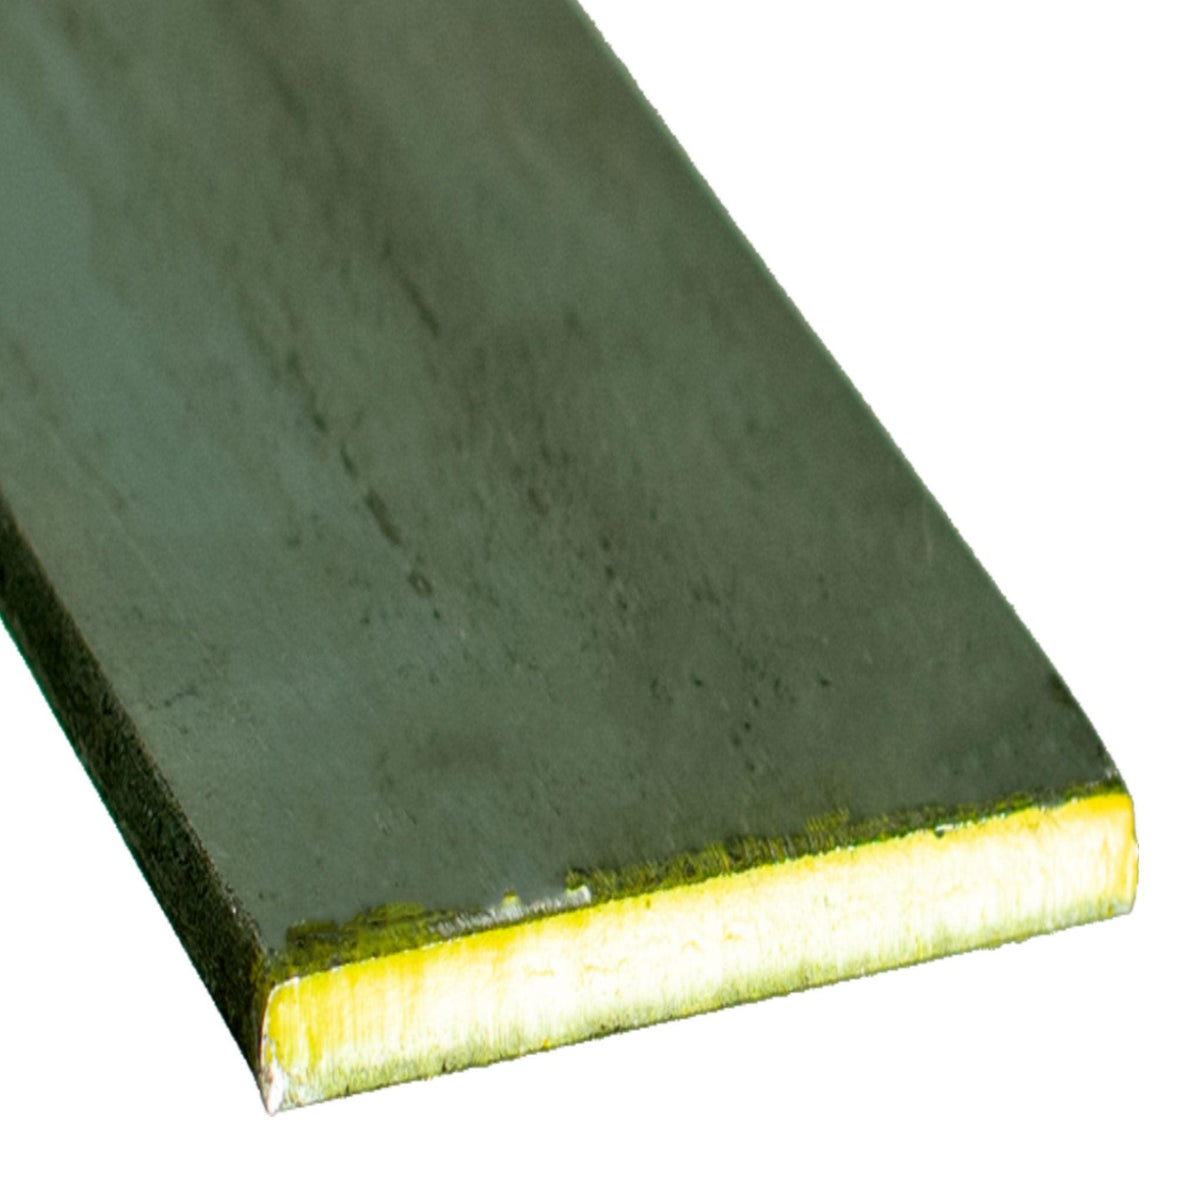 Hot Rolled Flat Bar Steel Raw Materials Sold at Lee Display - 3/4in X 3FT